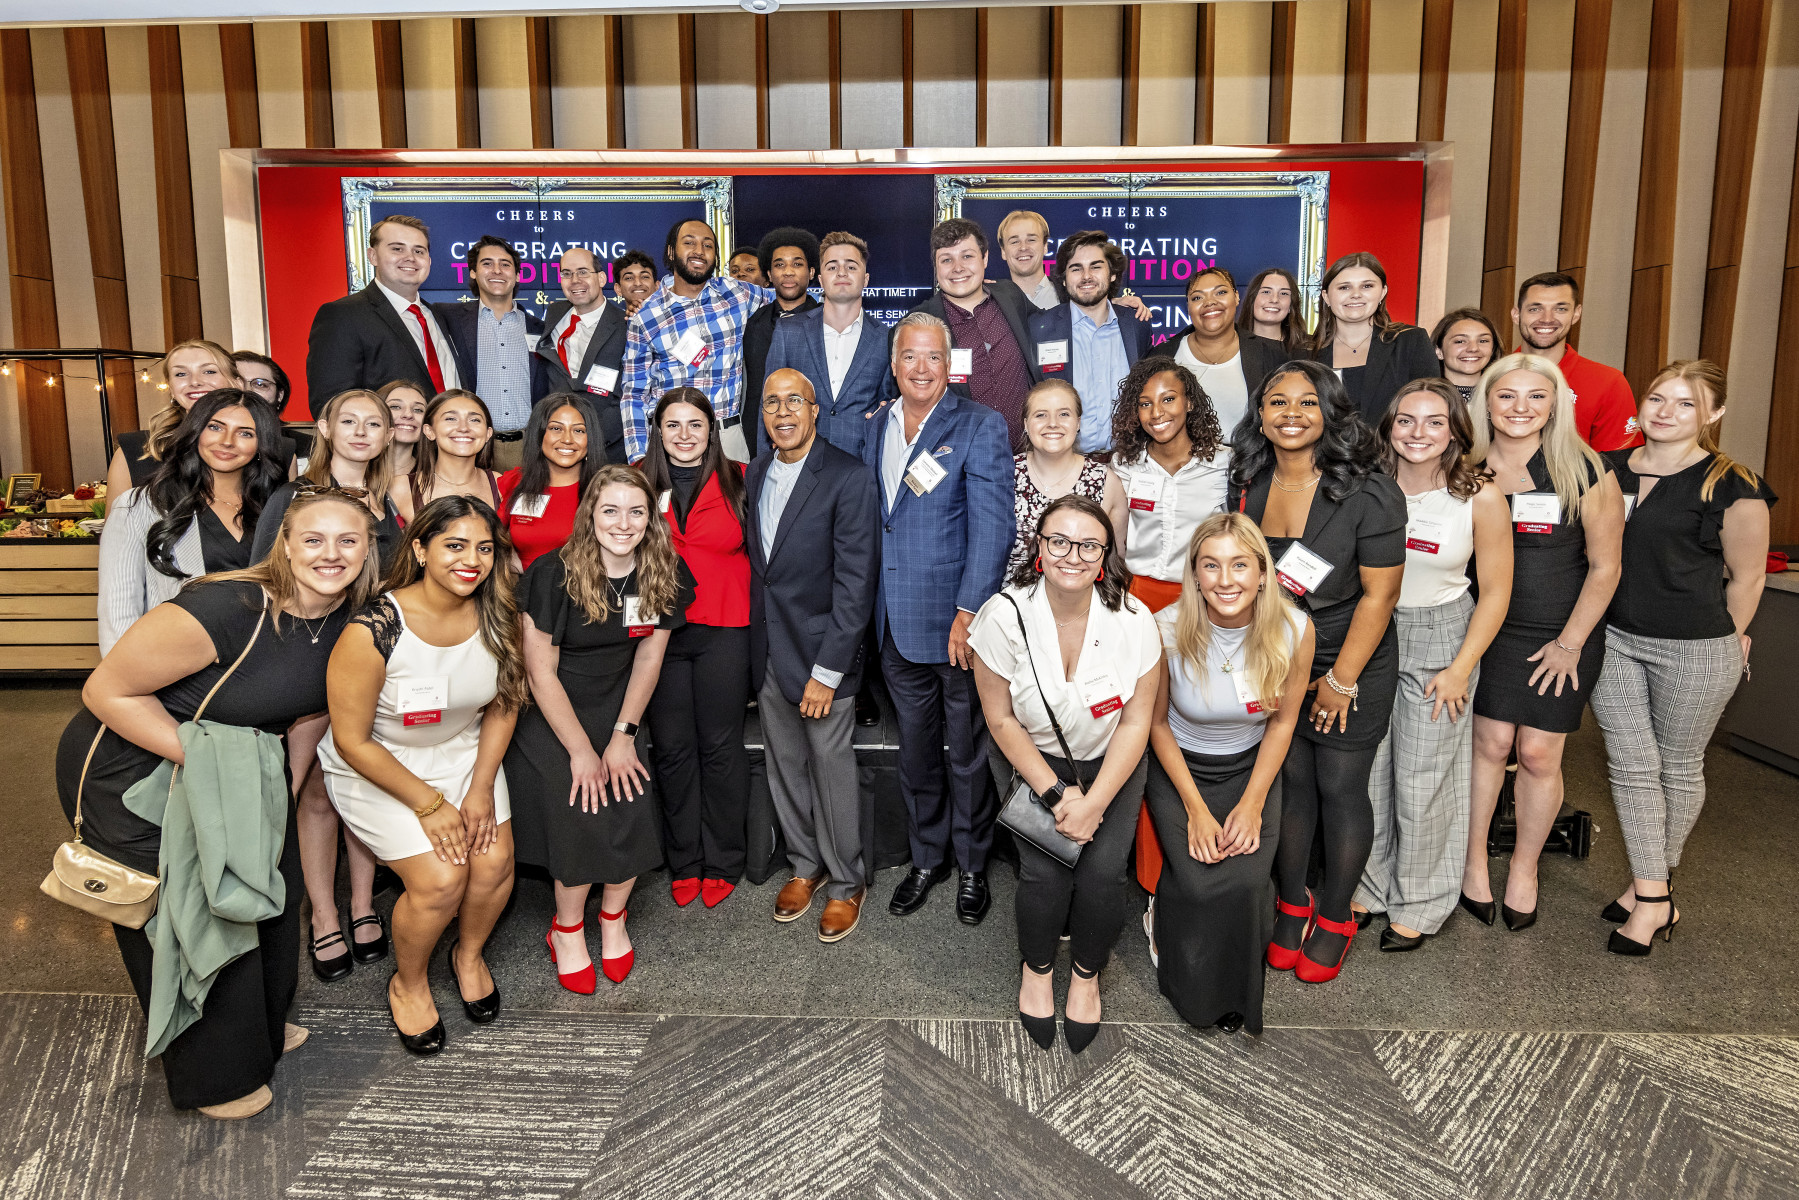 Ohio State Hospitality Management students and Dean Don Pope-Davis with Cameron Mitchell at Big Dish event